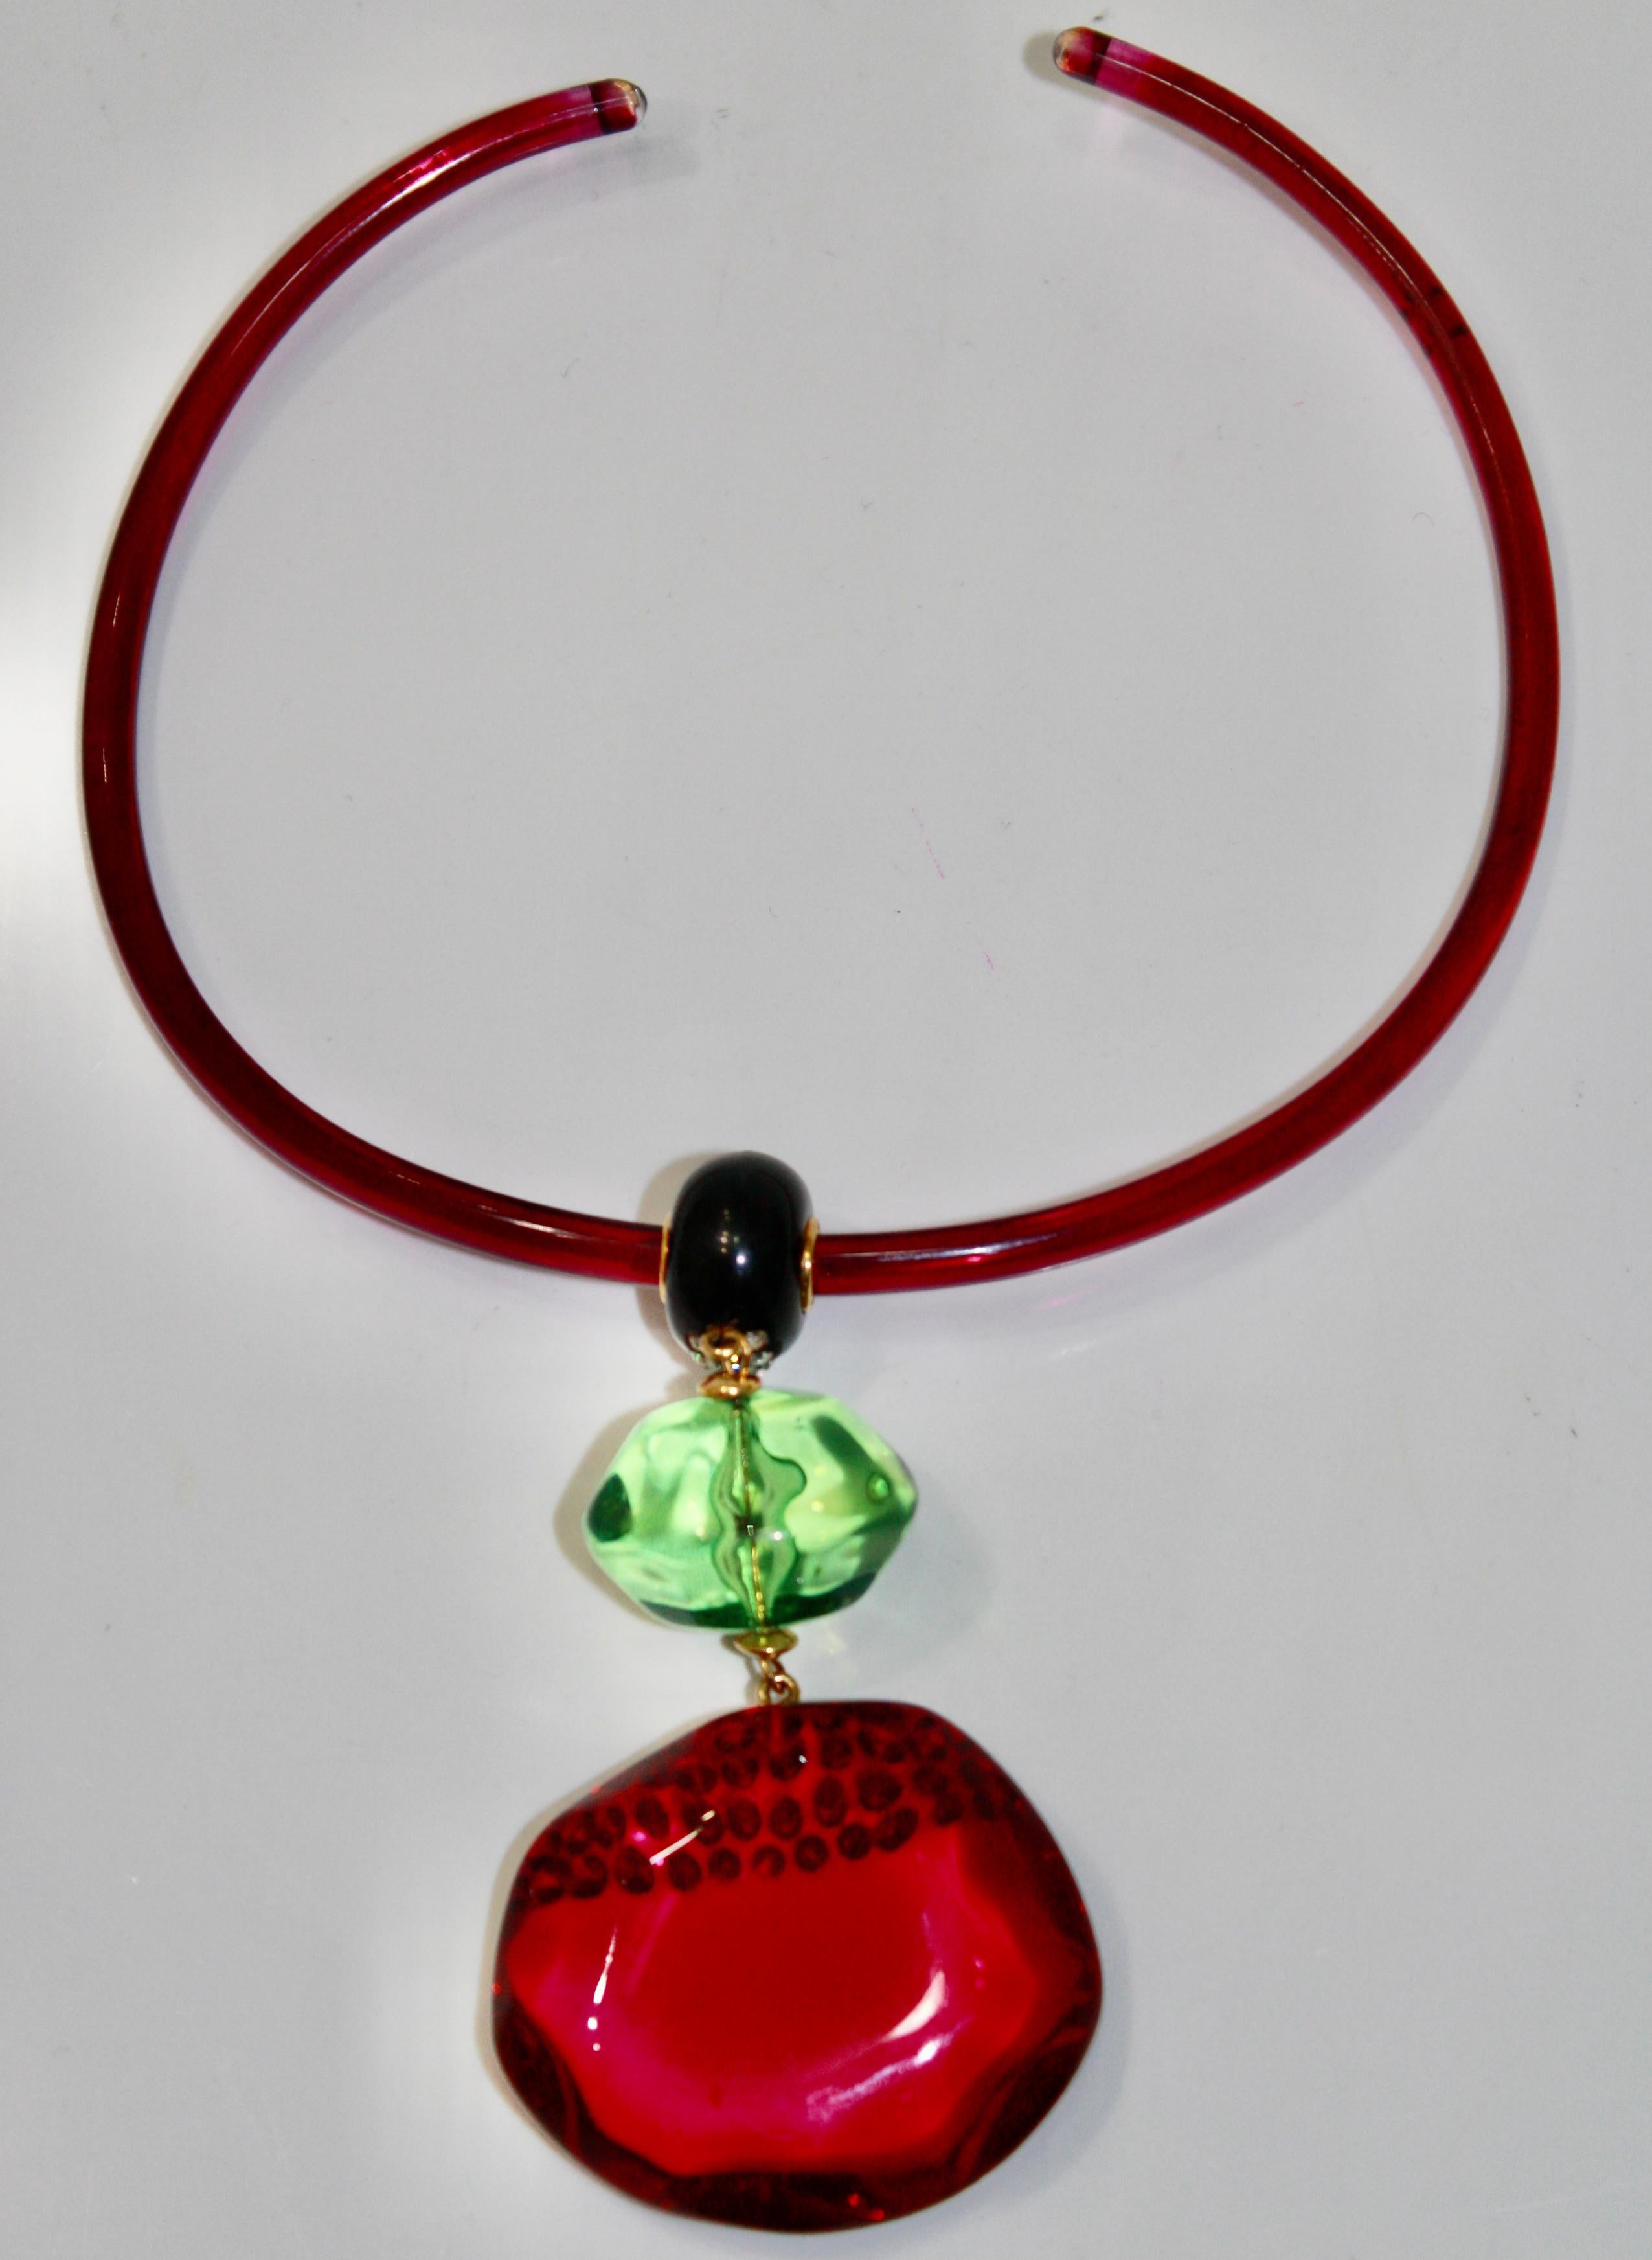 Modern acrylic design in Fuchsia and green with Swarovski cristal.
One size fits all.